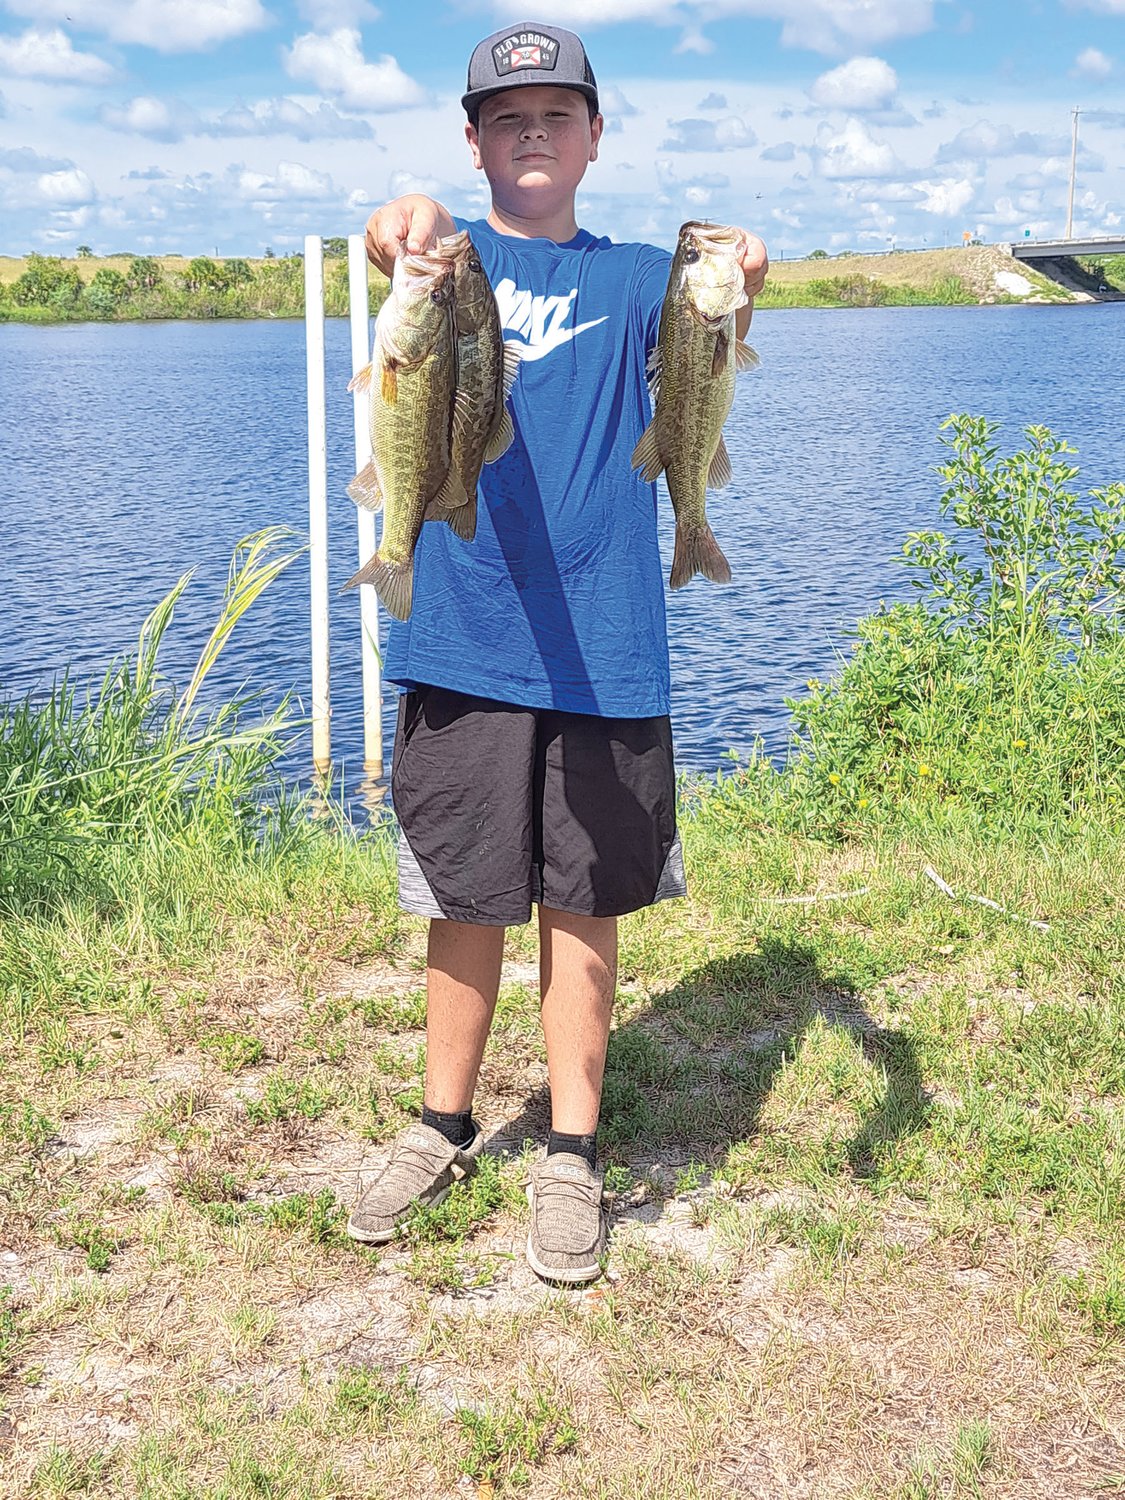 Waylen McLean placed third in the 9-13 Age Group with 5.26 pounds.